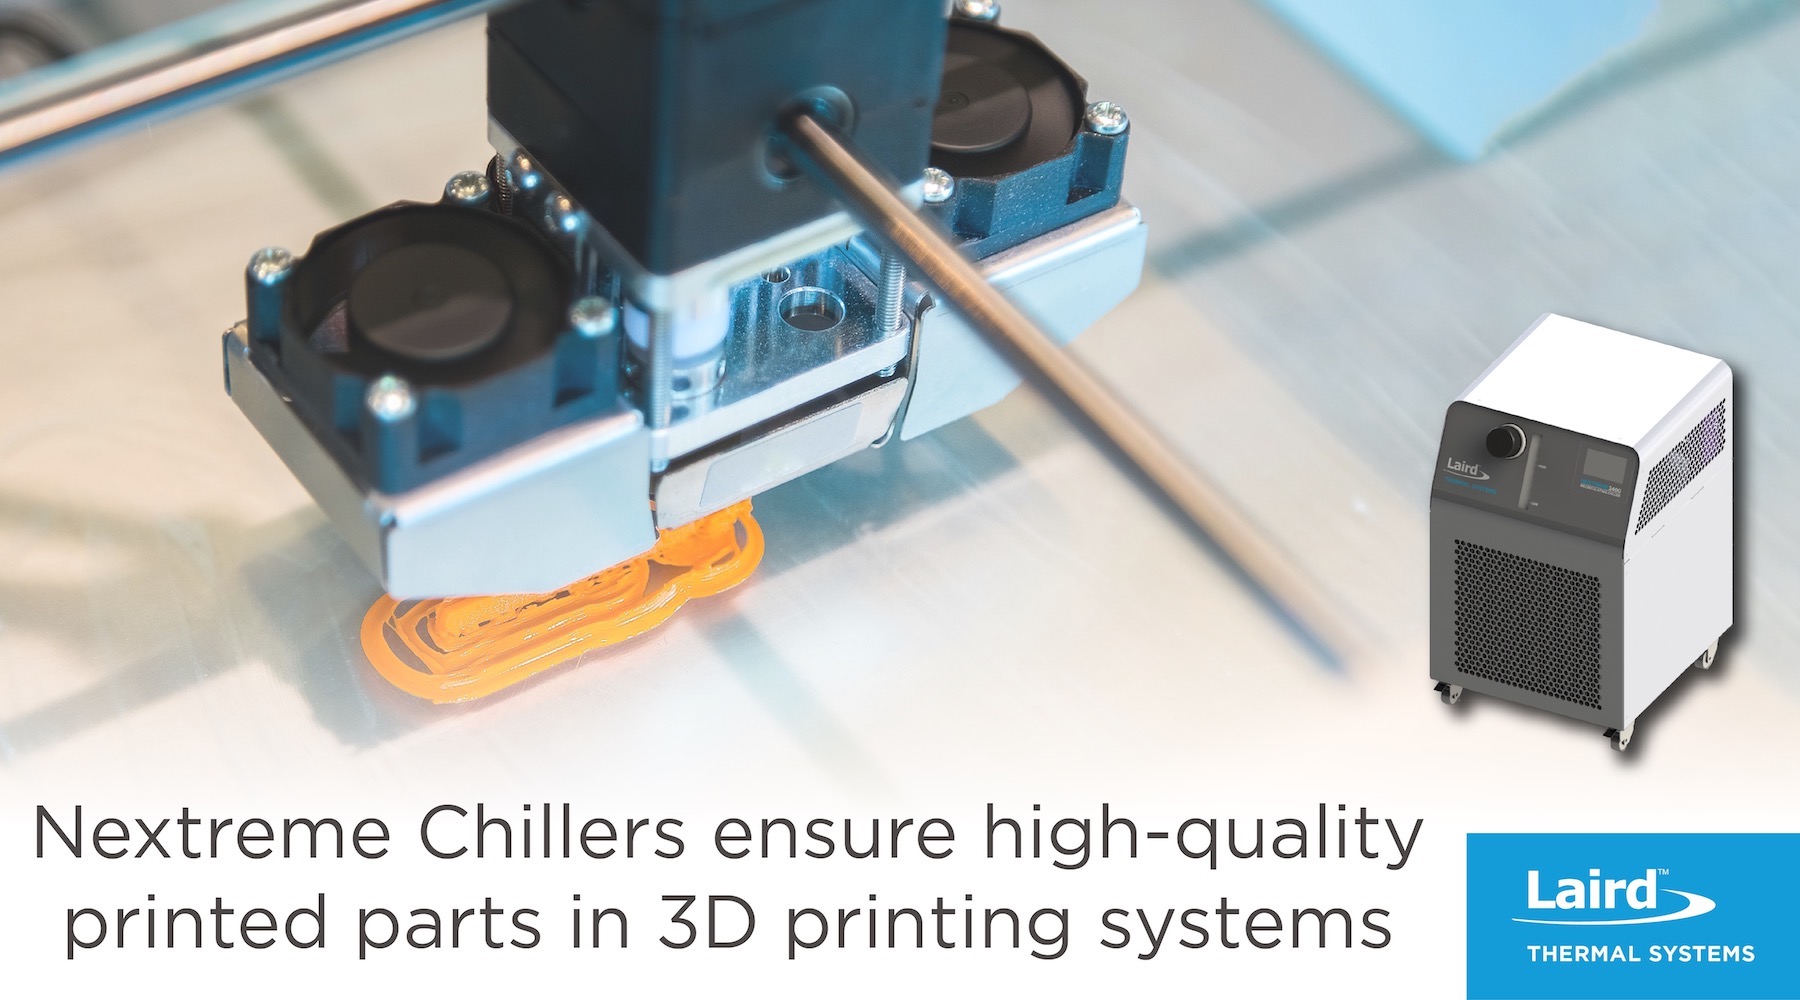 Chiller Platform Efficiently Cools 3D Printing Systems